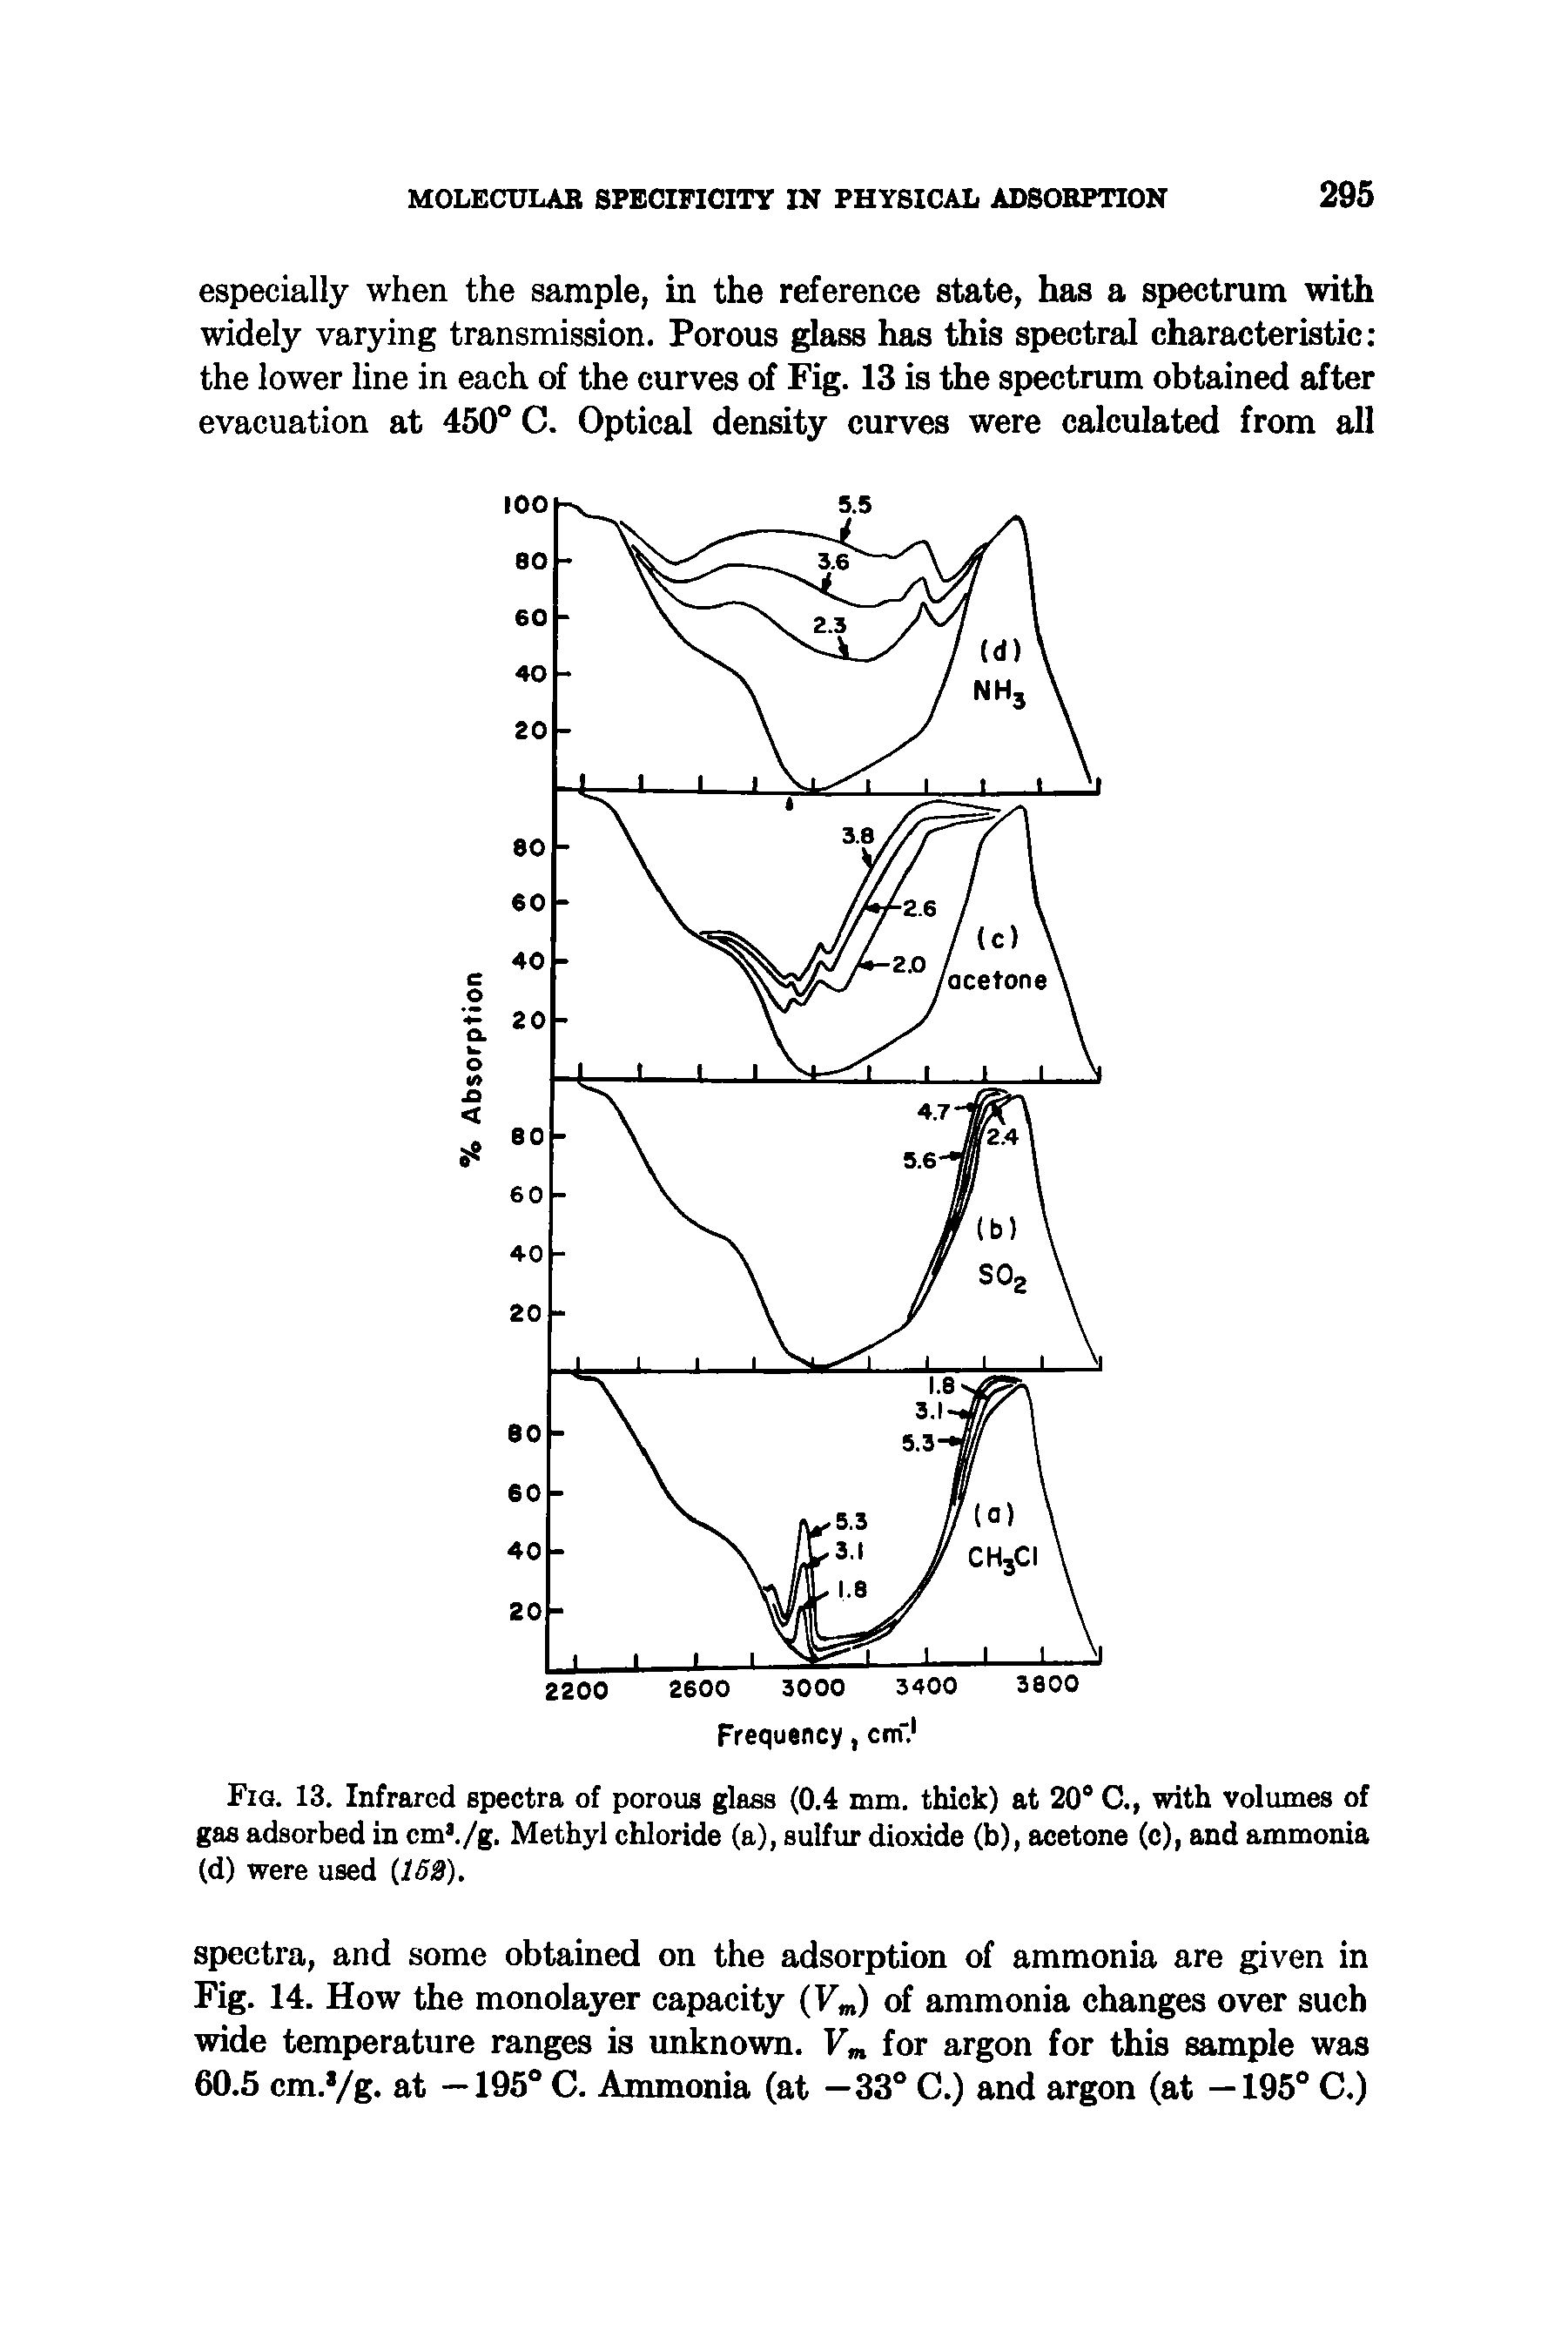 Fig. 13. Infrared spectra of porous glass (0.4 mm. thick) at 20° C., with volumes of gas adsorbed in cm>./g. Methyl chloride (a), sulfur dioxide (b), acetone (c), and ammonia (d) were used 162).